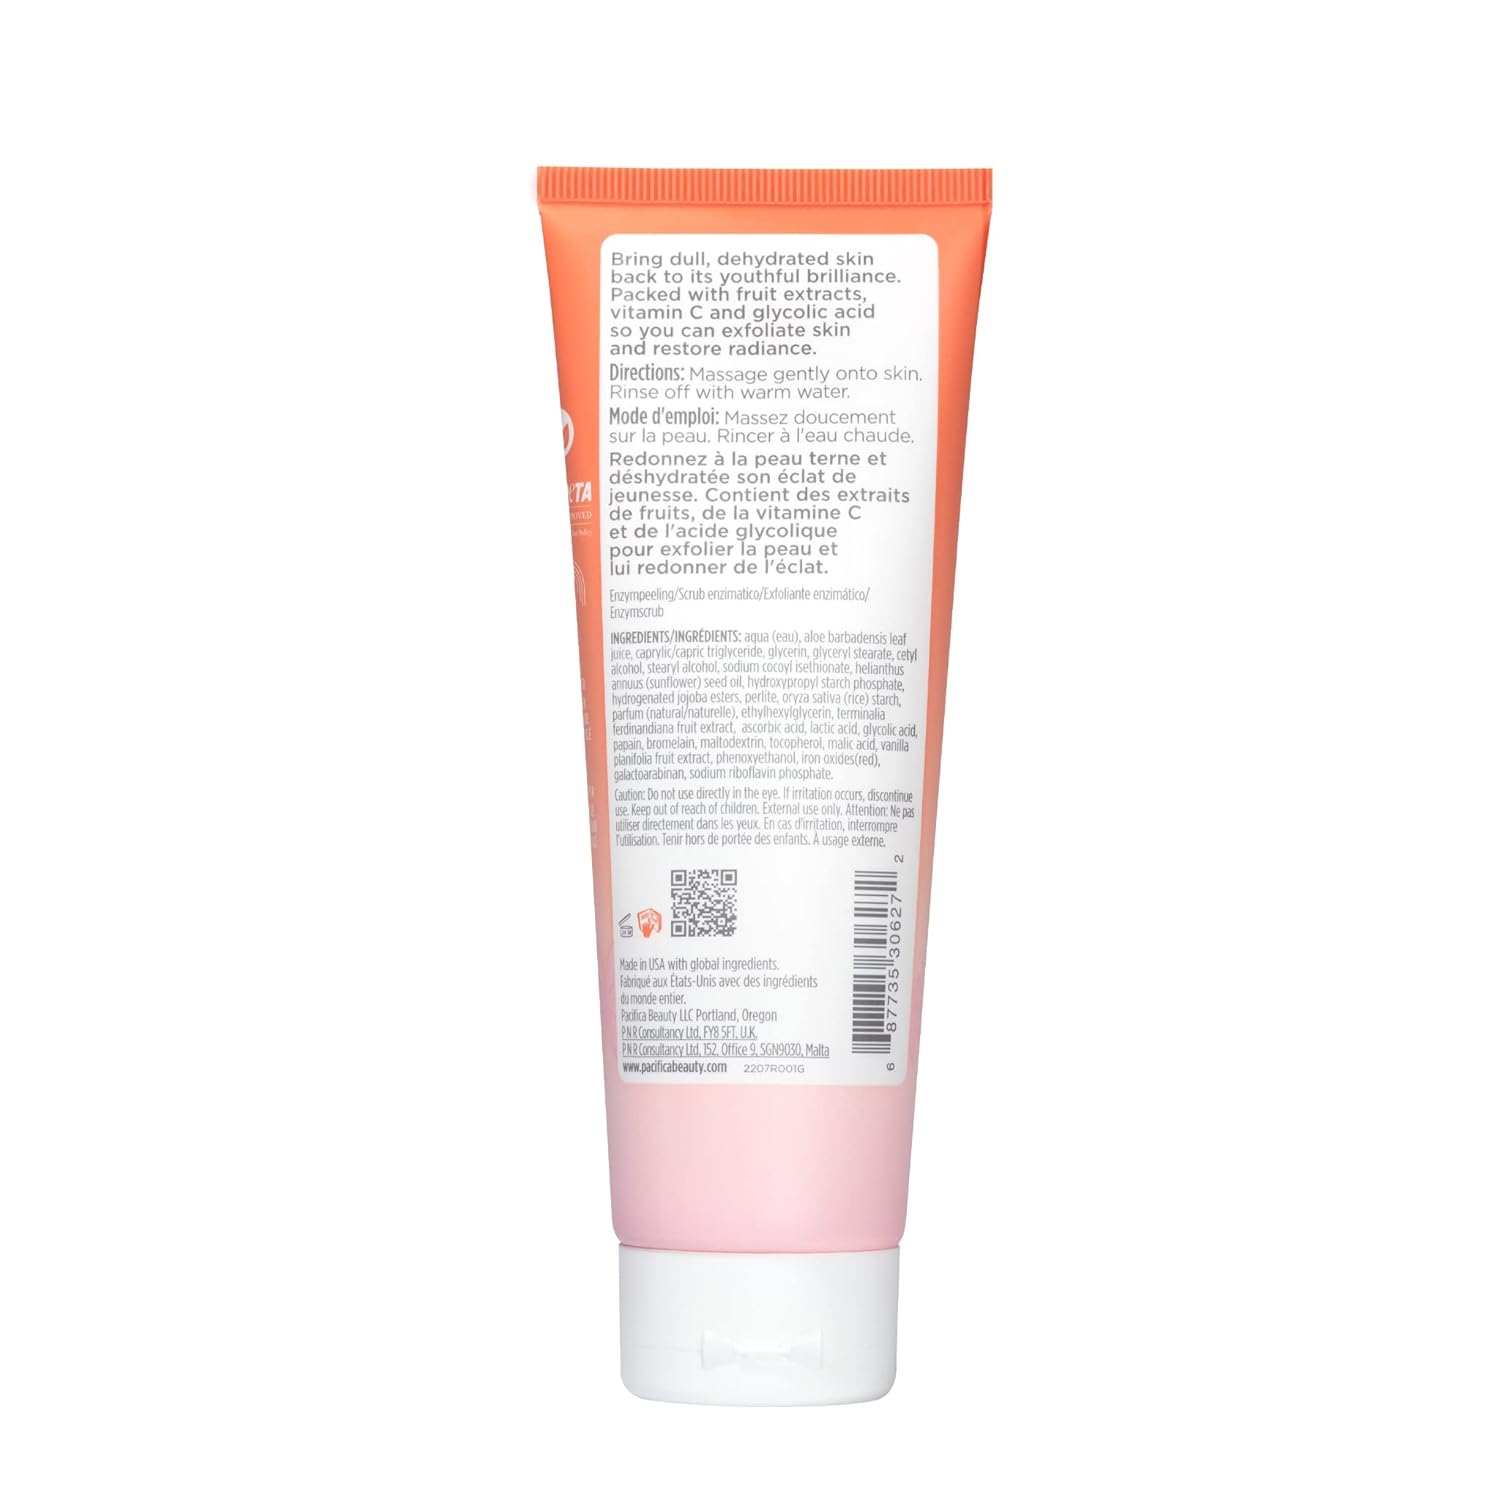 Pacifica Beauty, Glow Baby Super Lit Enzyme Face Scrub Exfoliating Face Wash, Vitamin C & Glycolic Acid, Unclog Pores, Brightening, For soft & smooth skin, Microbead Free, Vegan & Cruelty Free : Beauty & Personal Care